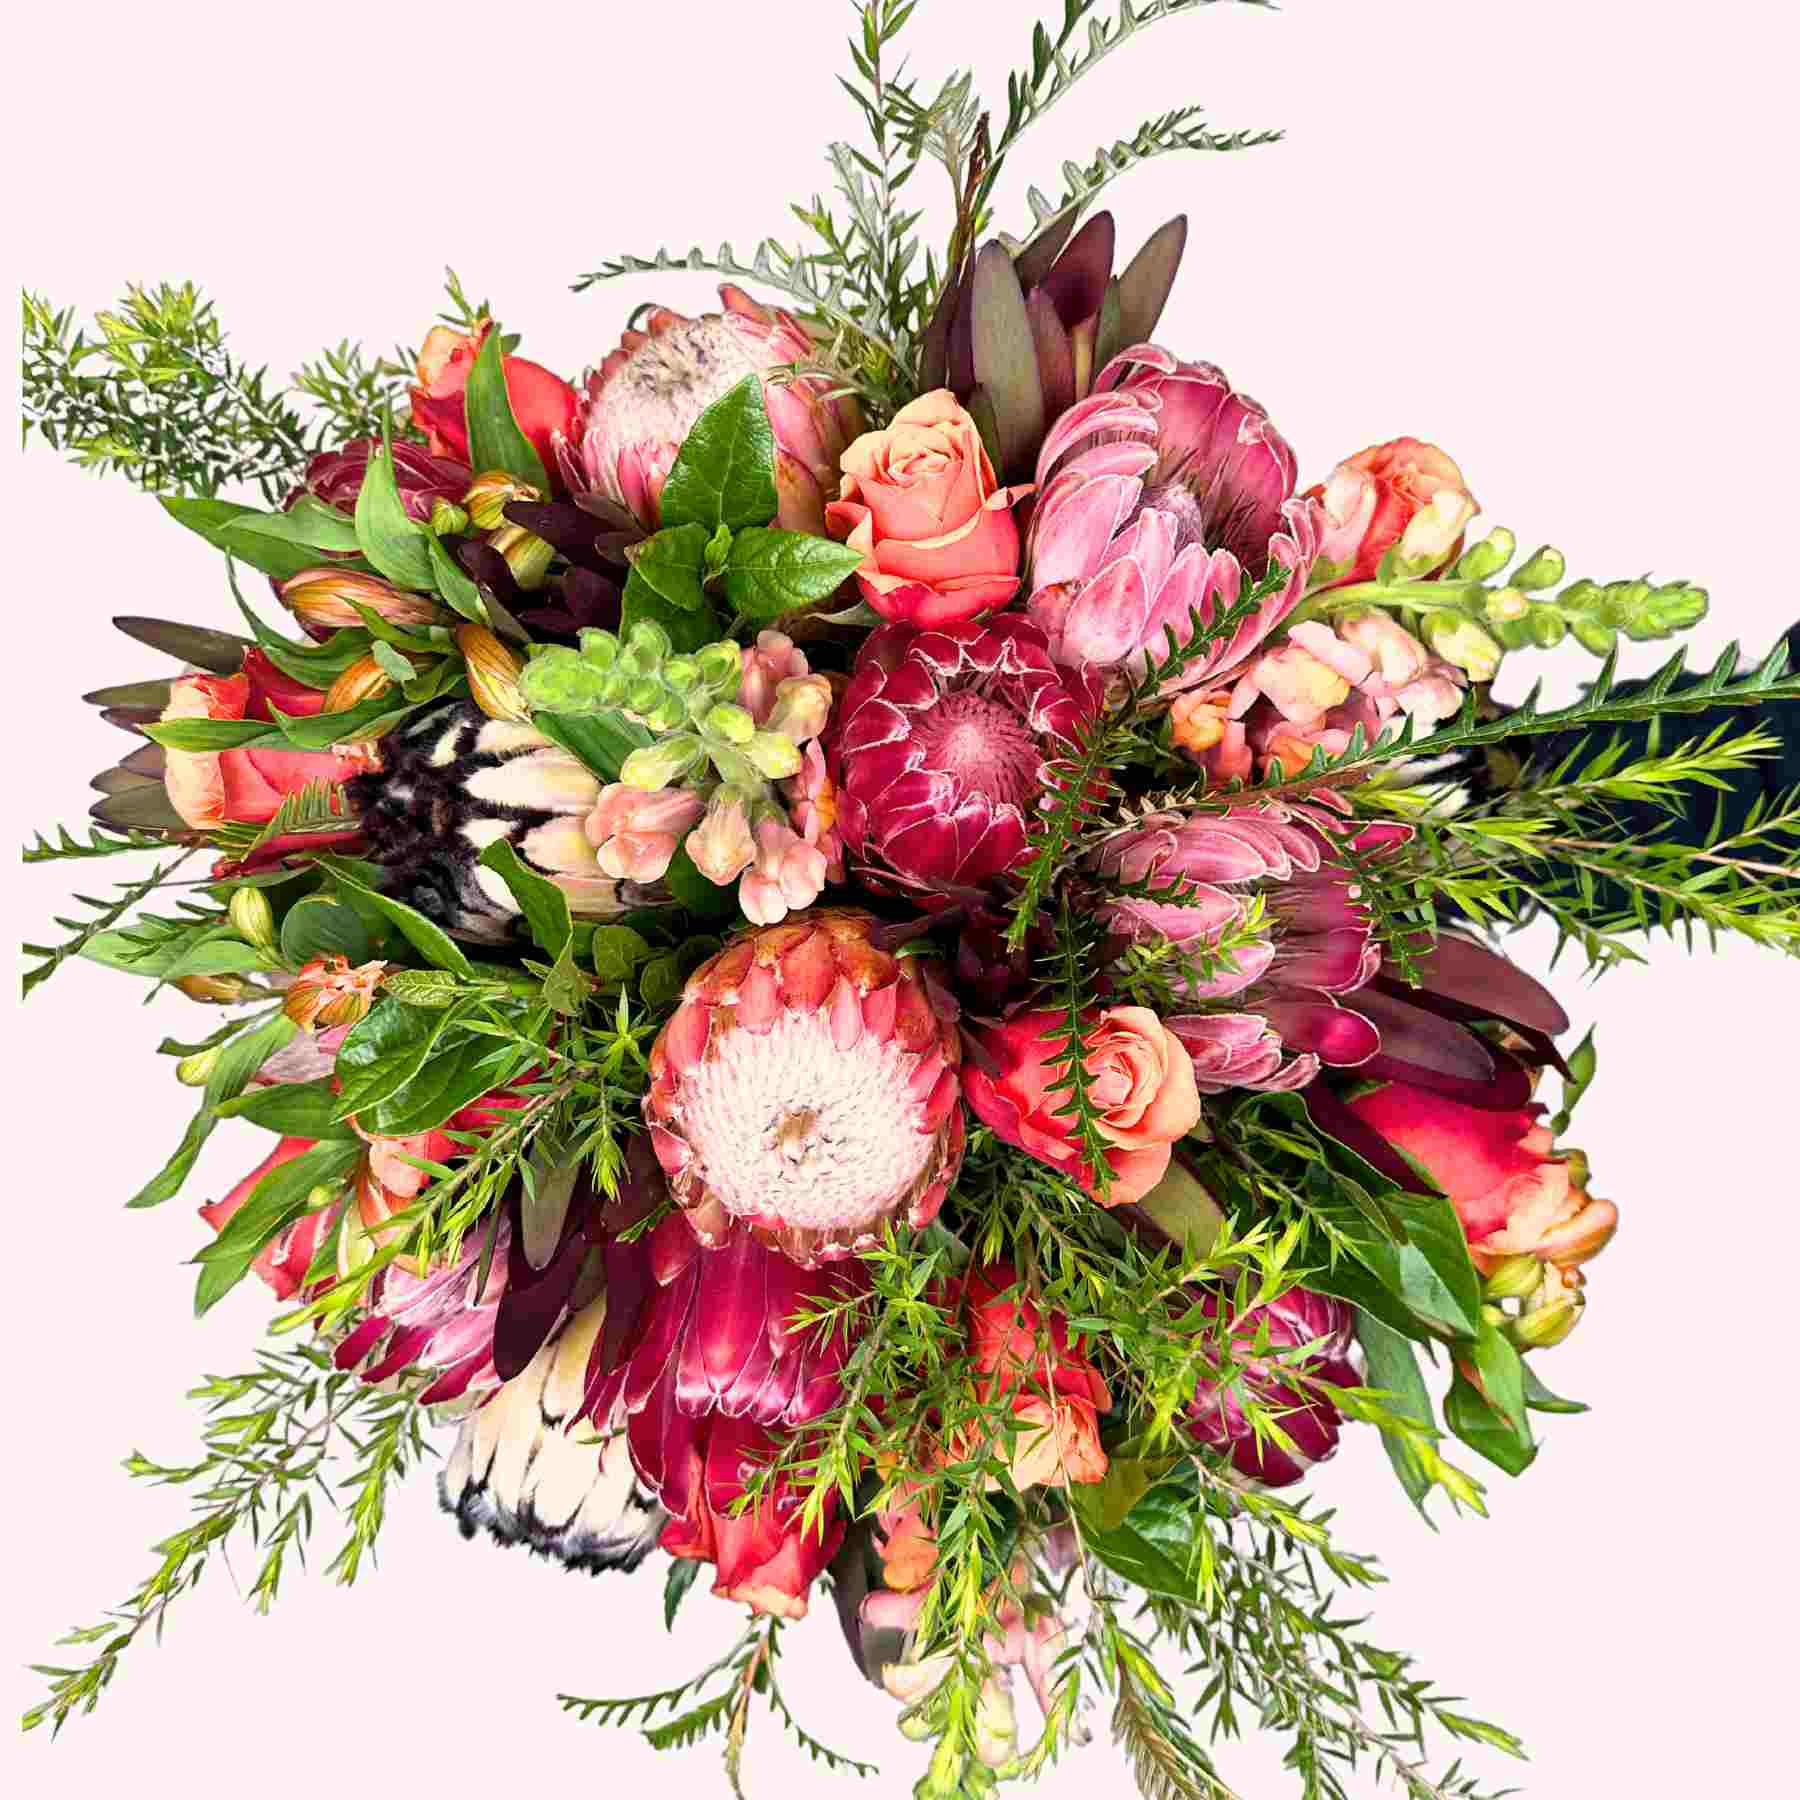 Luxurious arrangement of proteas, roses, and lush greenery in Jayne's Flower Bouquet from Fabulous Flowers and Gifts.